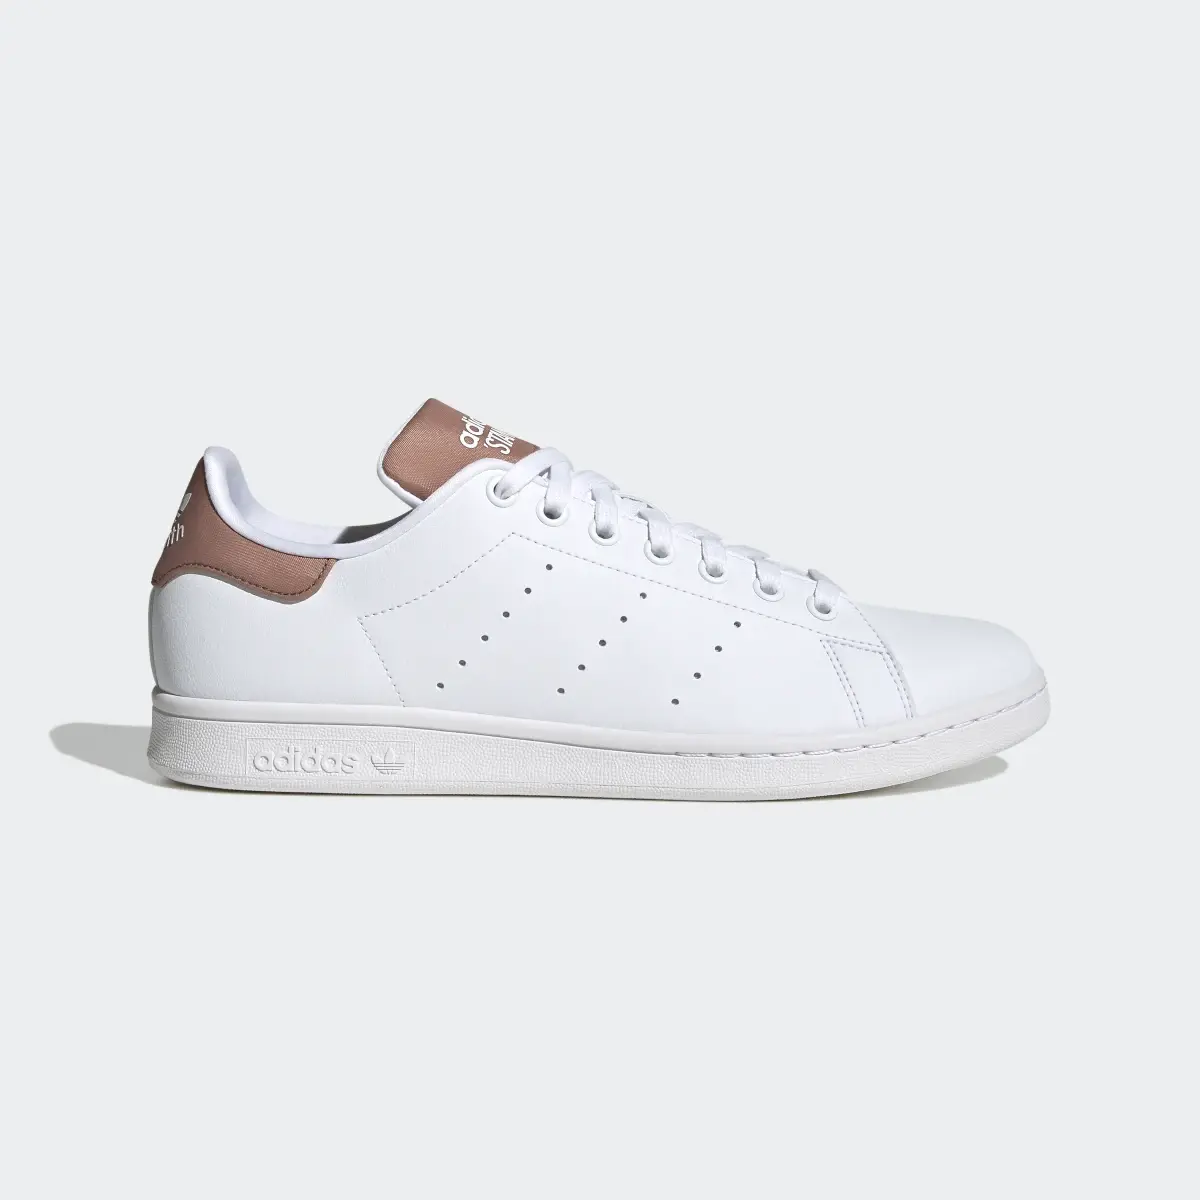 Adidas Stan Smith Shoes. 2